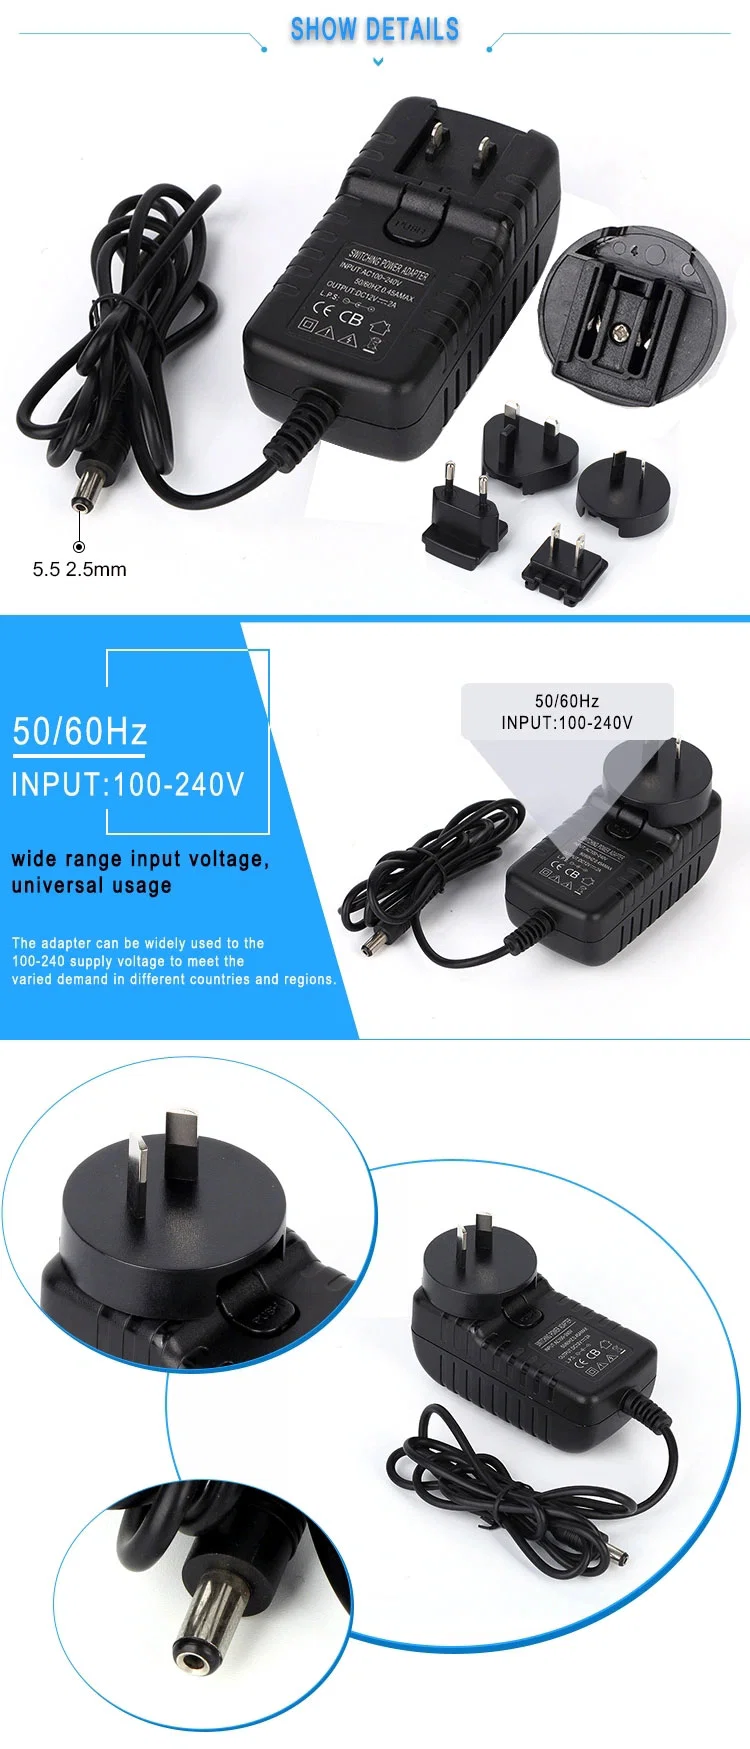 UL CE Listed Plug in 24V 18V 16V 15V 14V 10V 9V 6V 5V 12V 0.5A 1A 2A 3A 4A 12W 24W Wall Charger/AC DC Switching Adapter/Power Supply for Medical/LED/CCTV/Router